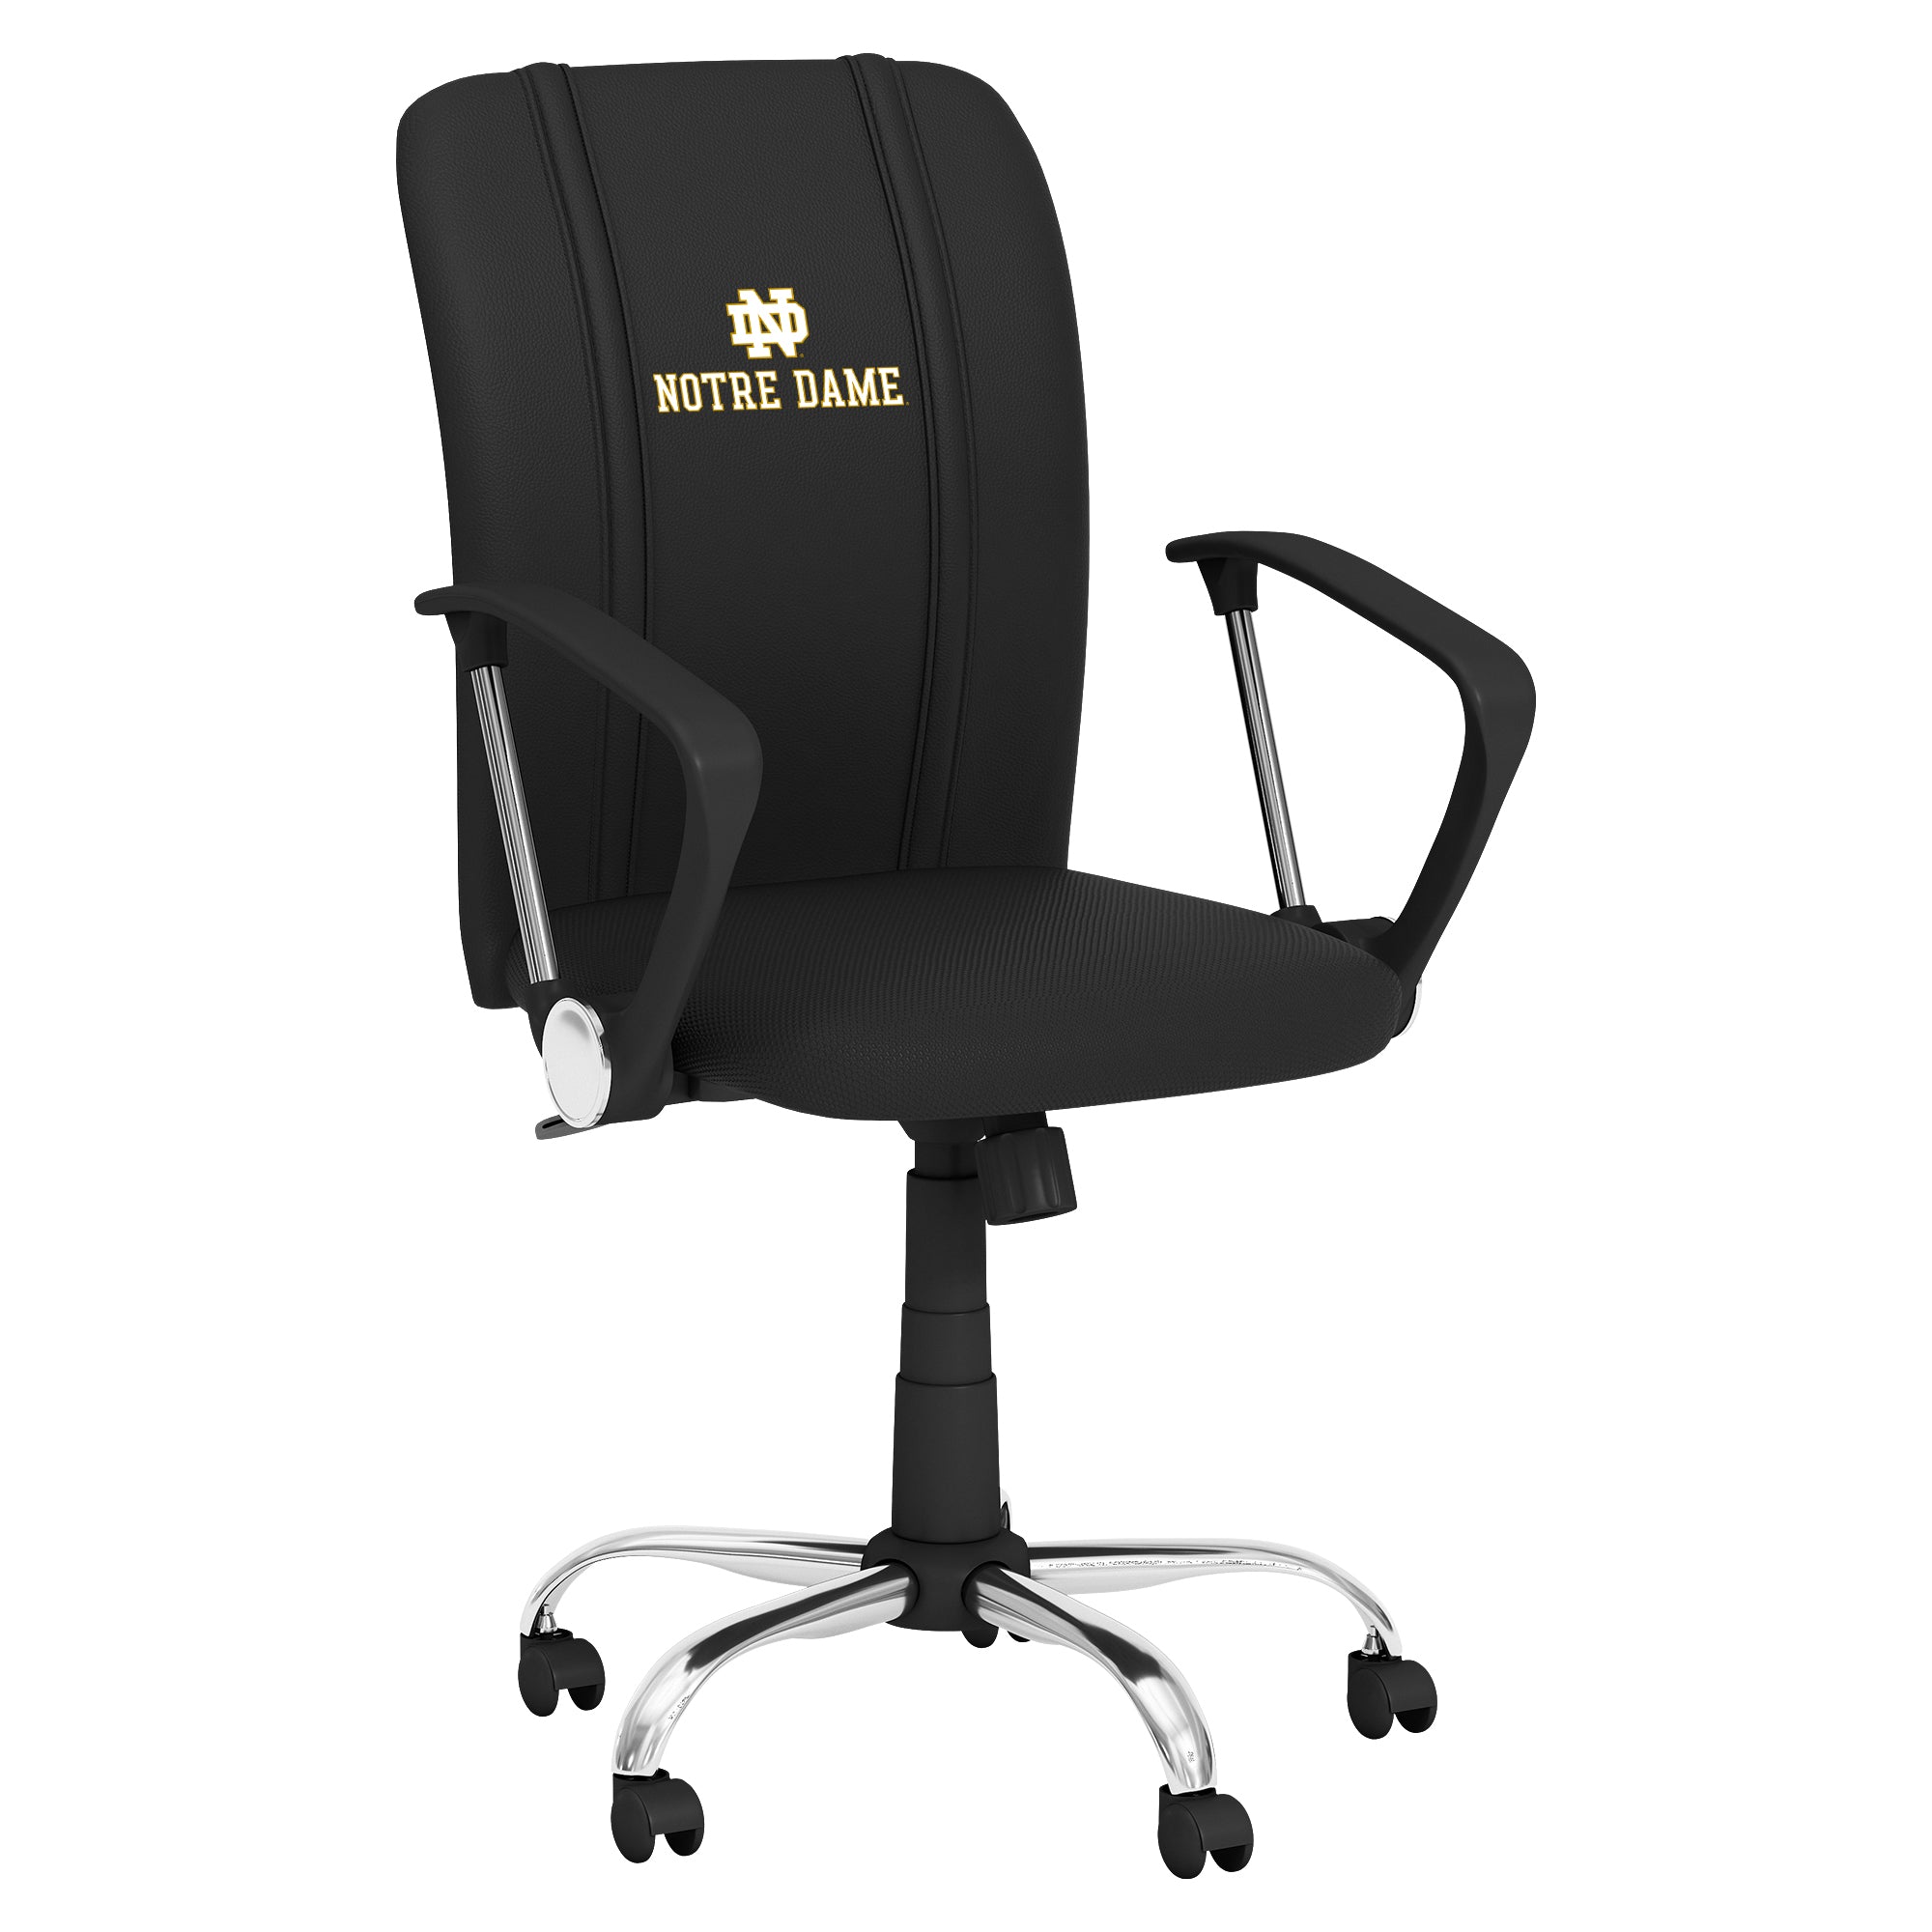 Notre Dame Curve Task Chair with Notre Dame Alternate Logo